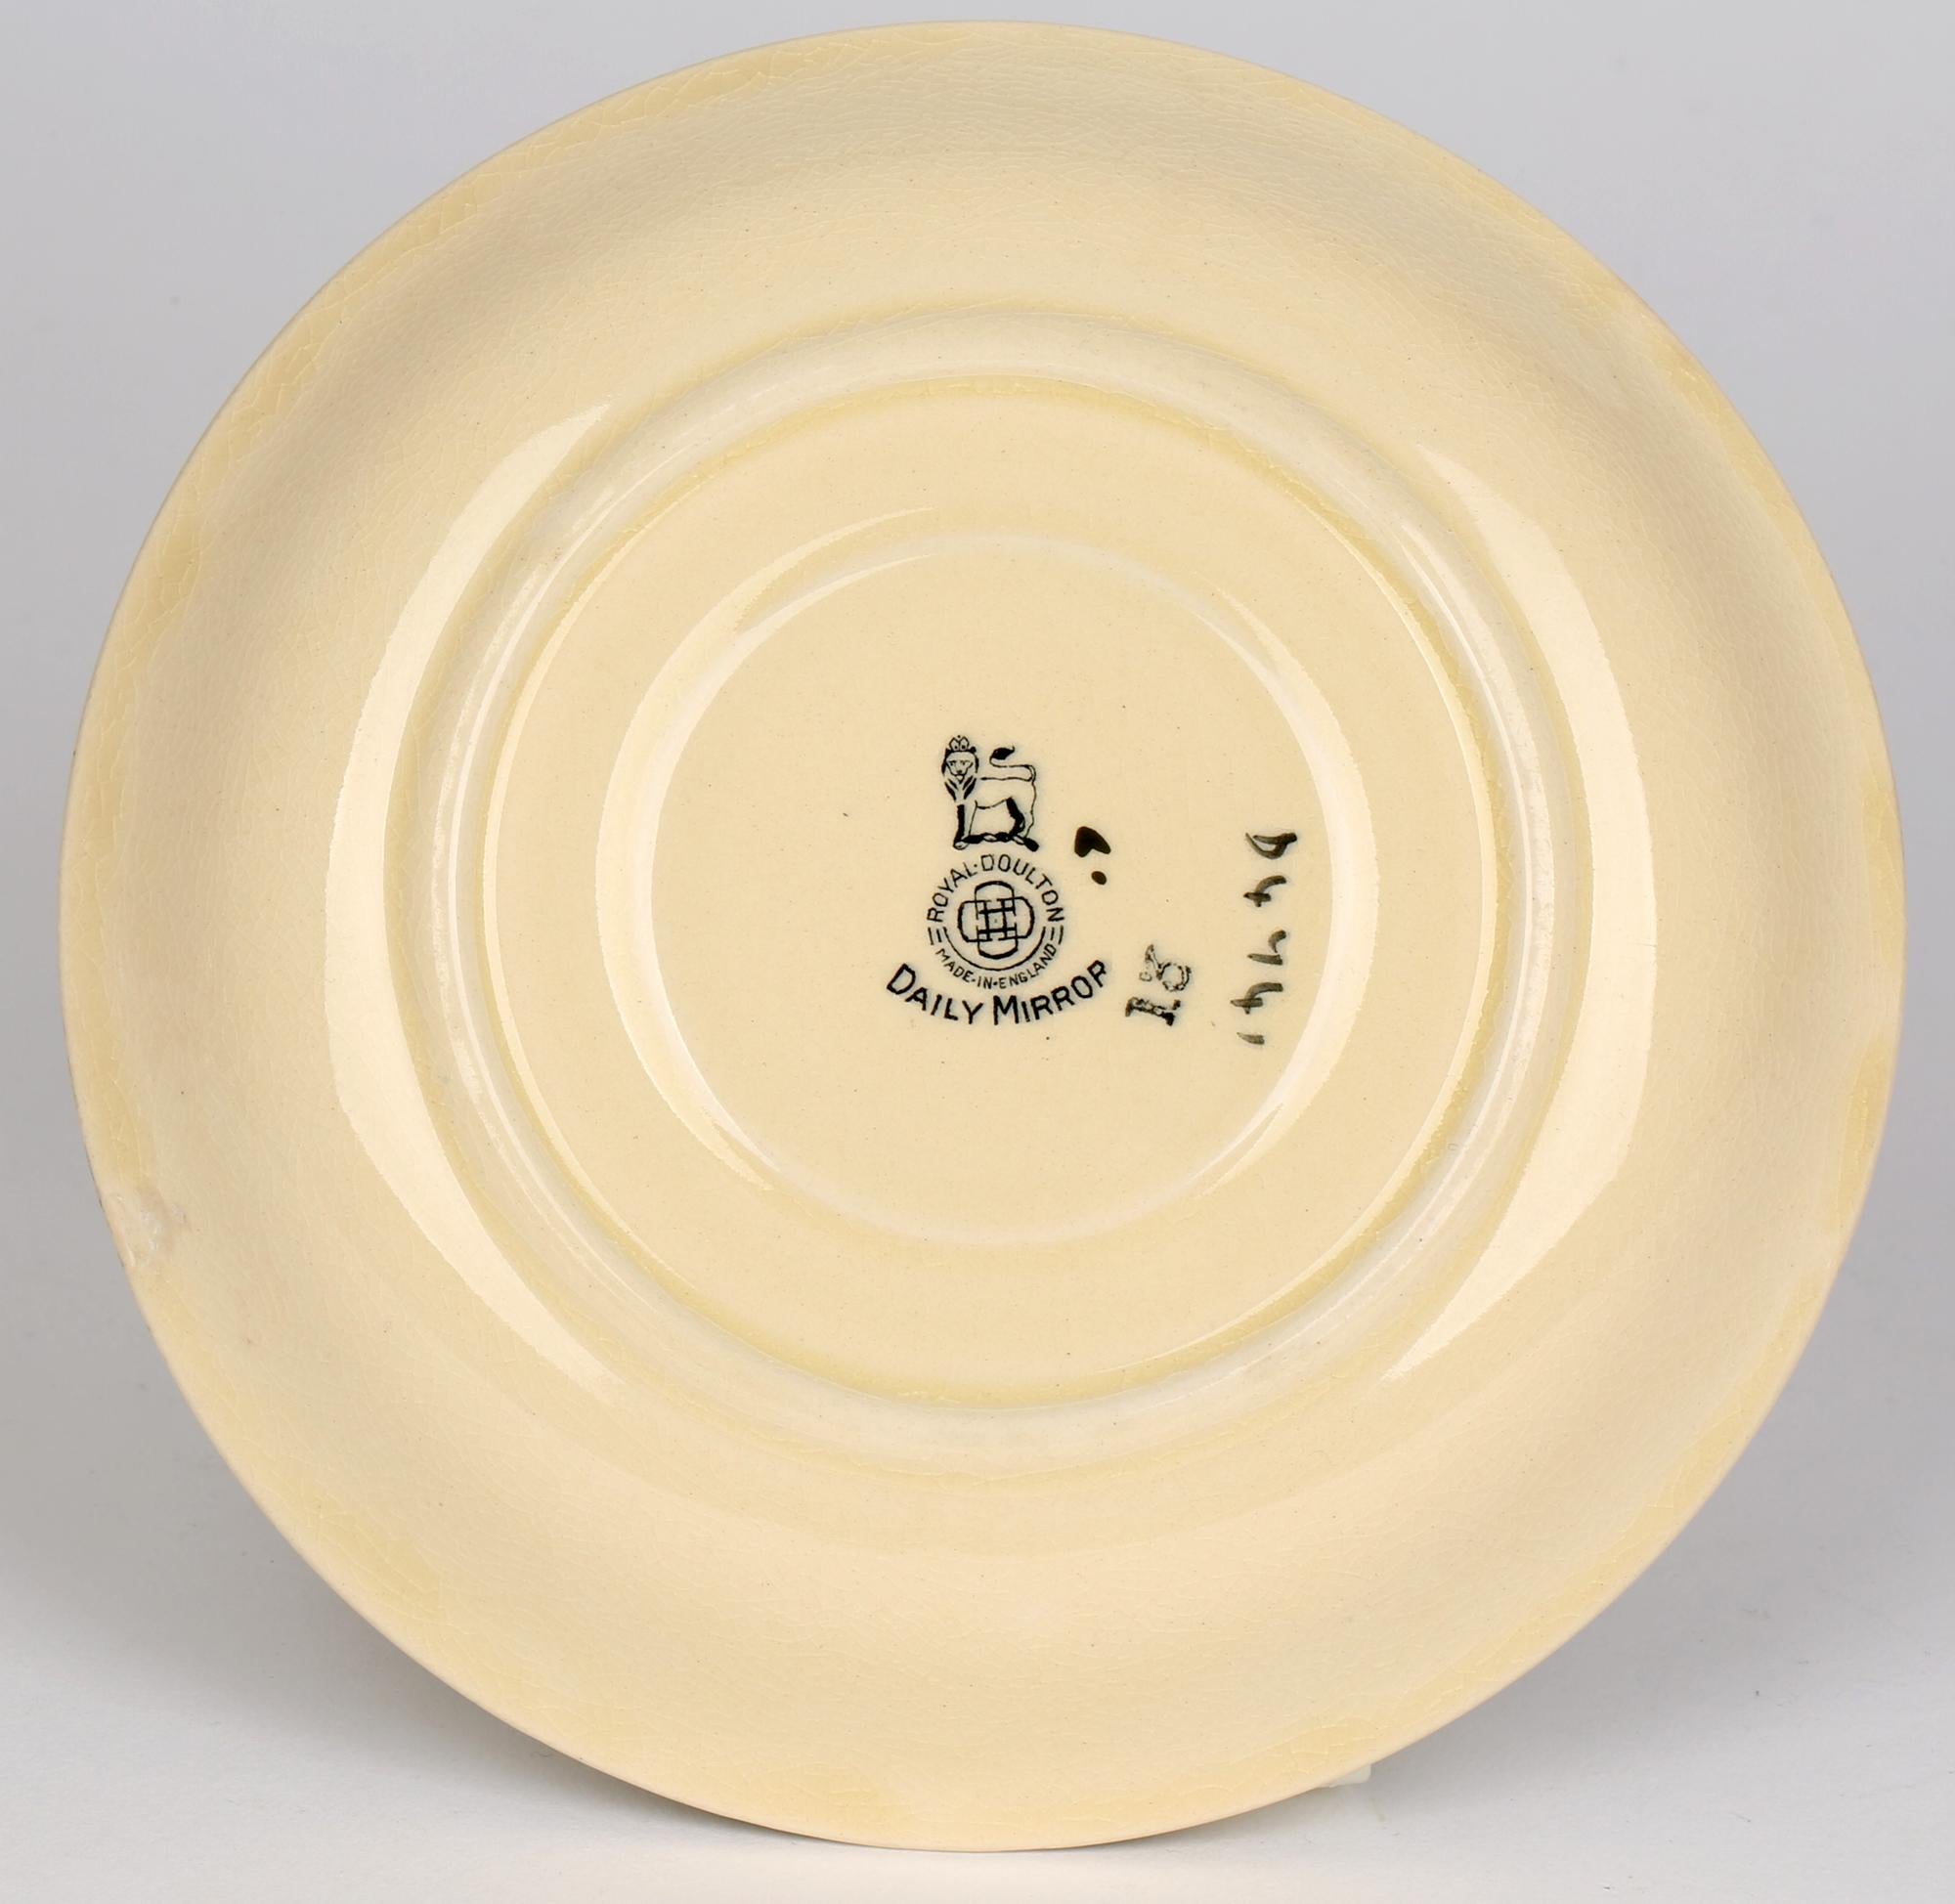 Royal Doulton Burslem Art Deco Pip, Squeak & Wilfred Daily Mirror Pottery Saucer In Good Condition For Sale In Bishop's Stortford, Hertfordshire